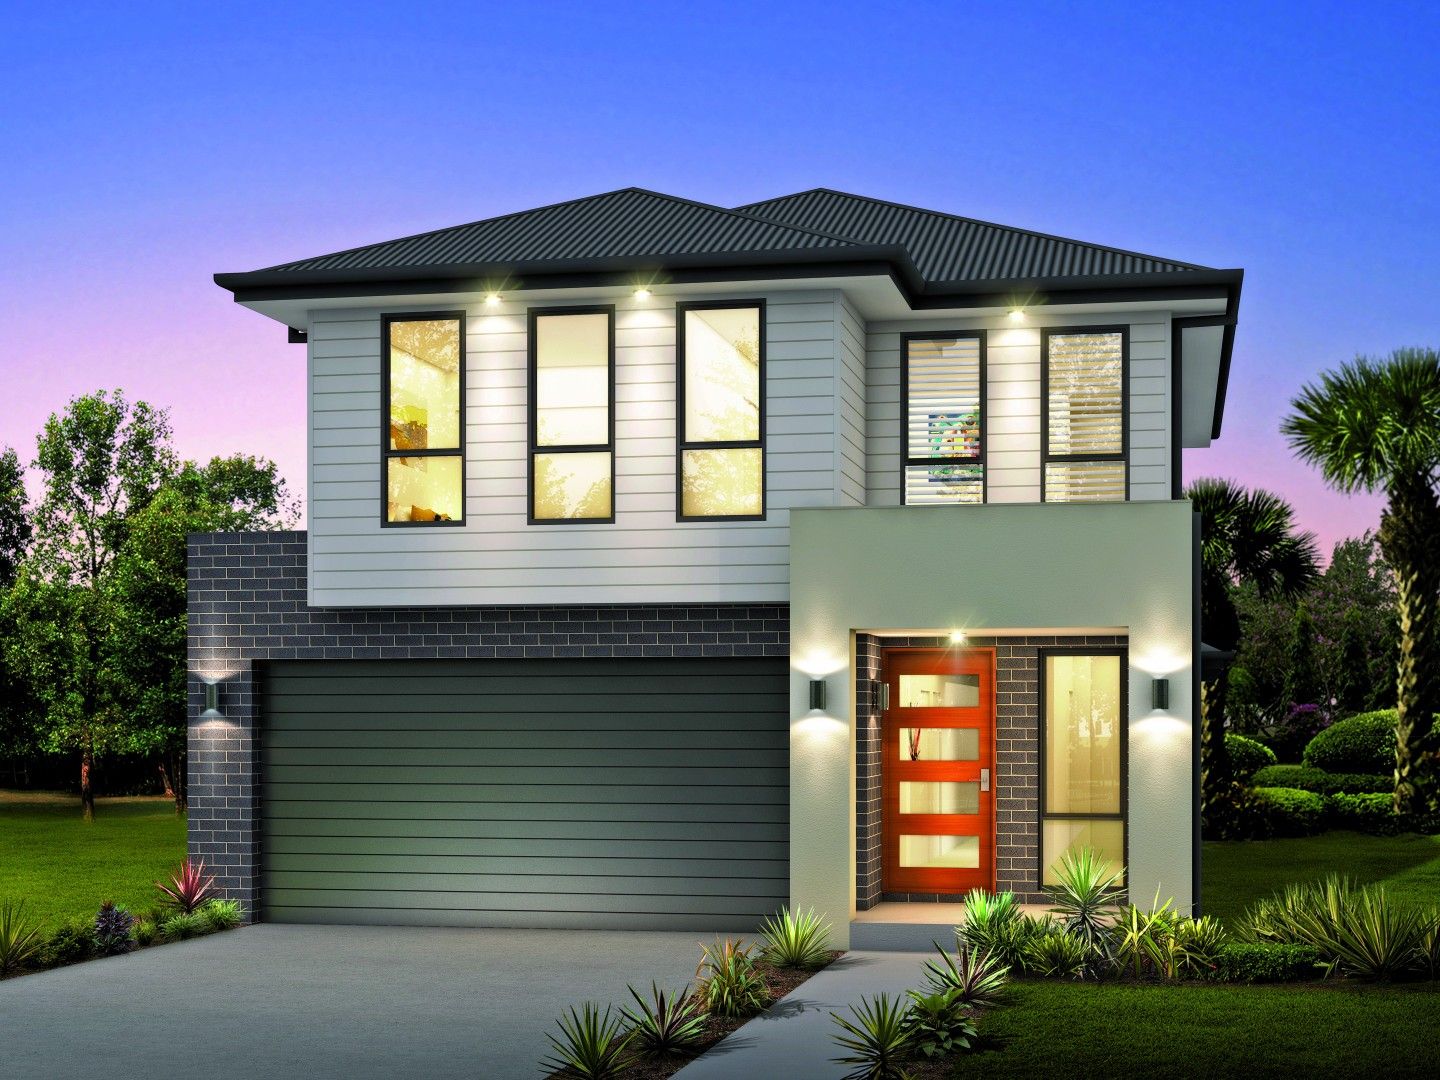 5 bedrooms New House & Land in Lot 4479 Steeplechase Street BOX HILL NSW, 2765